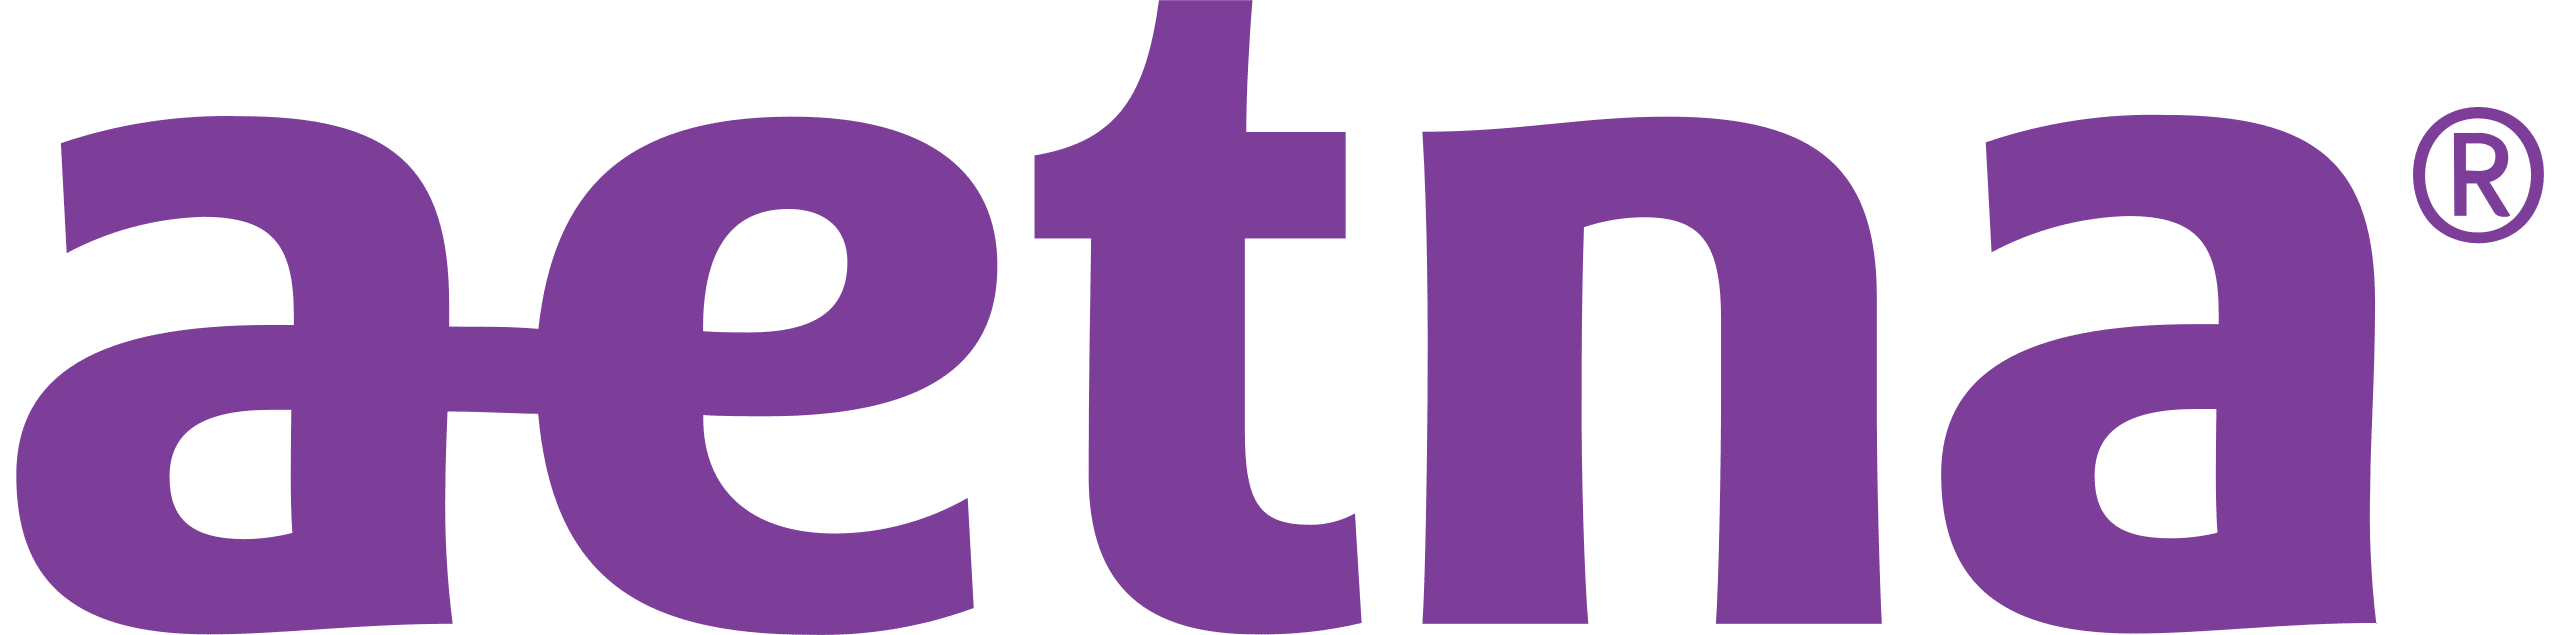 Aetna logo.svg About